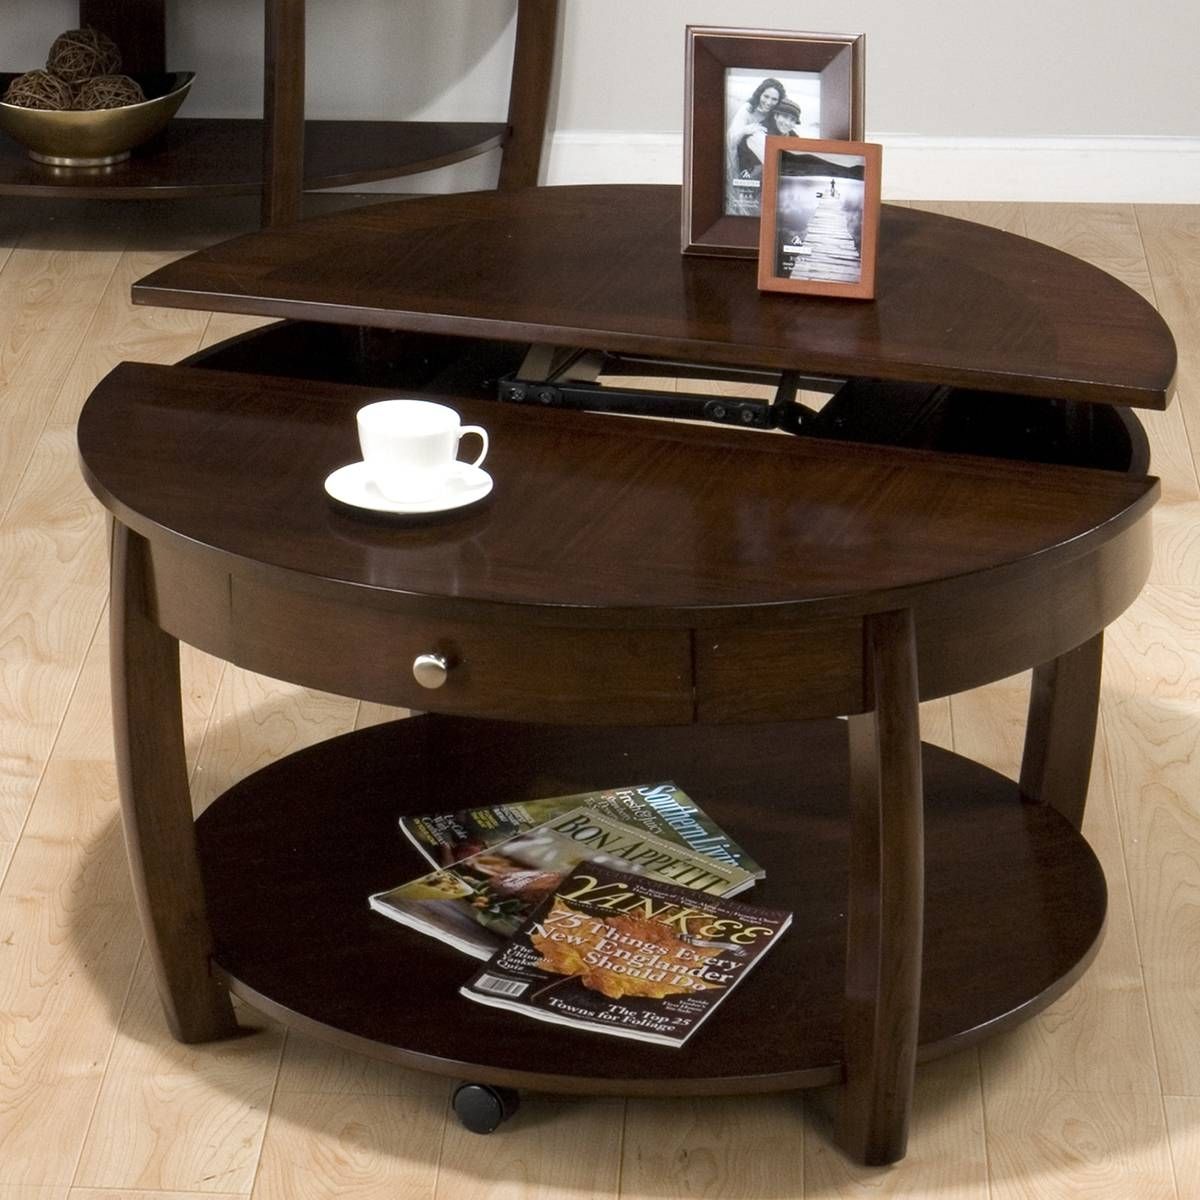 Small Round Coffee Table With Storage – Starrkingschool Intended For Small Coffee Tables With Drawer (View 14 of 30)